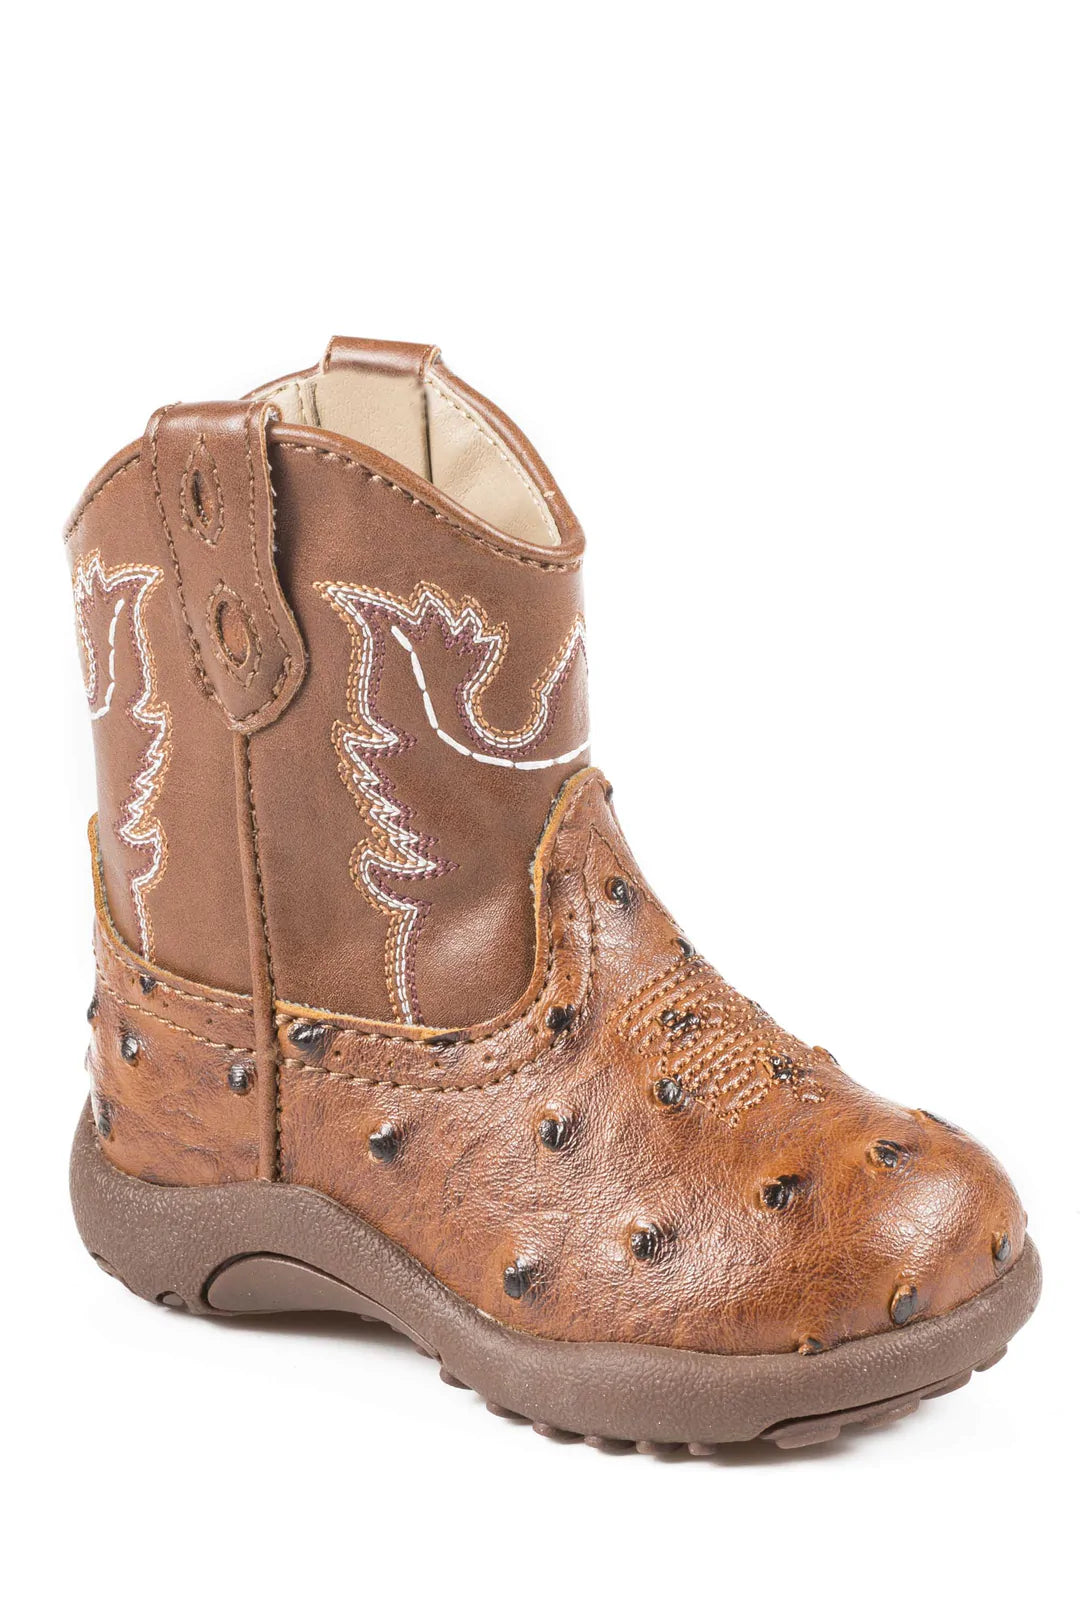 Infant & Toddler Roper Tan Faux Leather Ostrich Print Boots (0807)